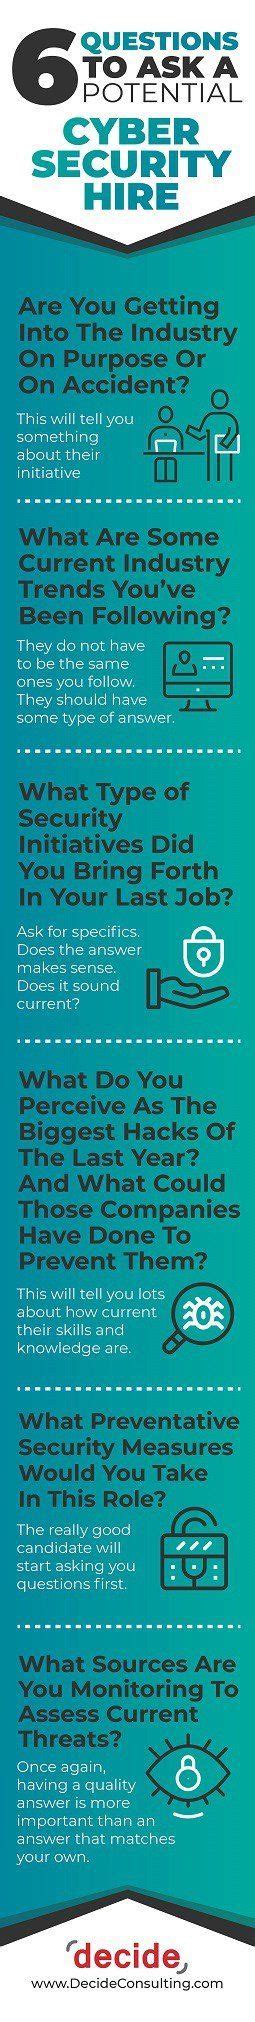 questions    potential cyber security hire infographic